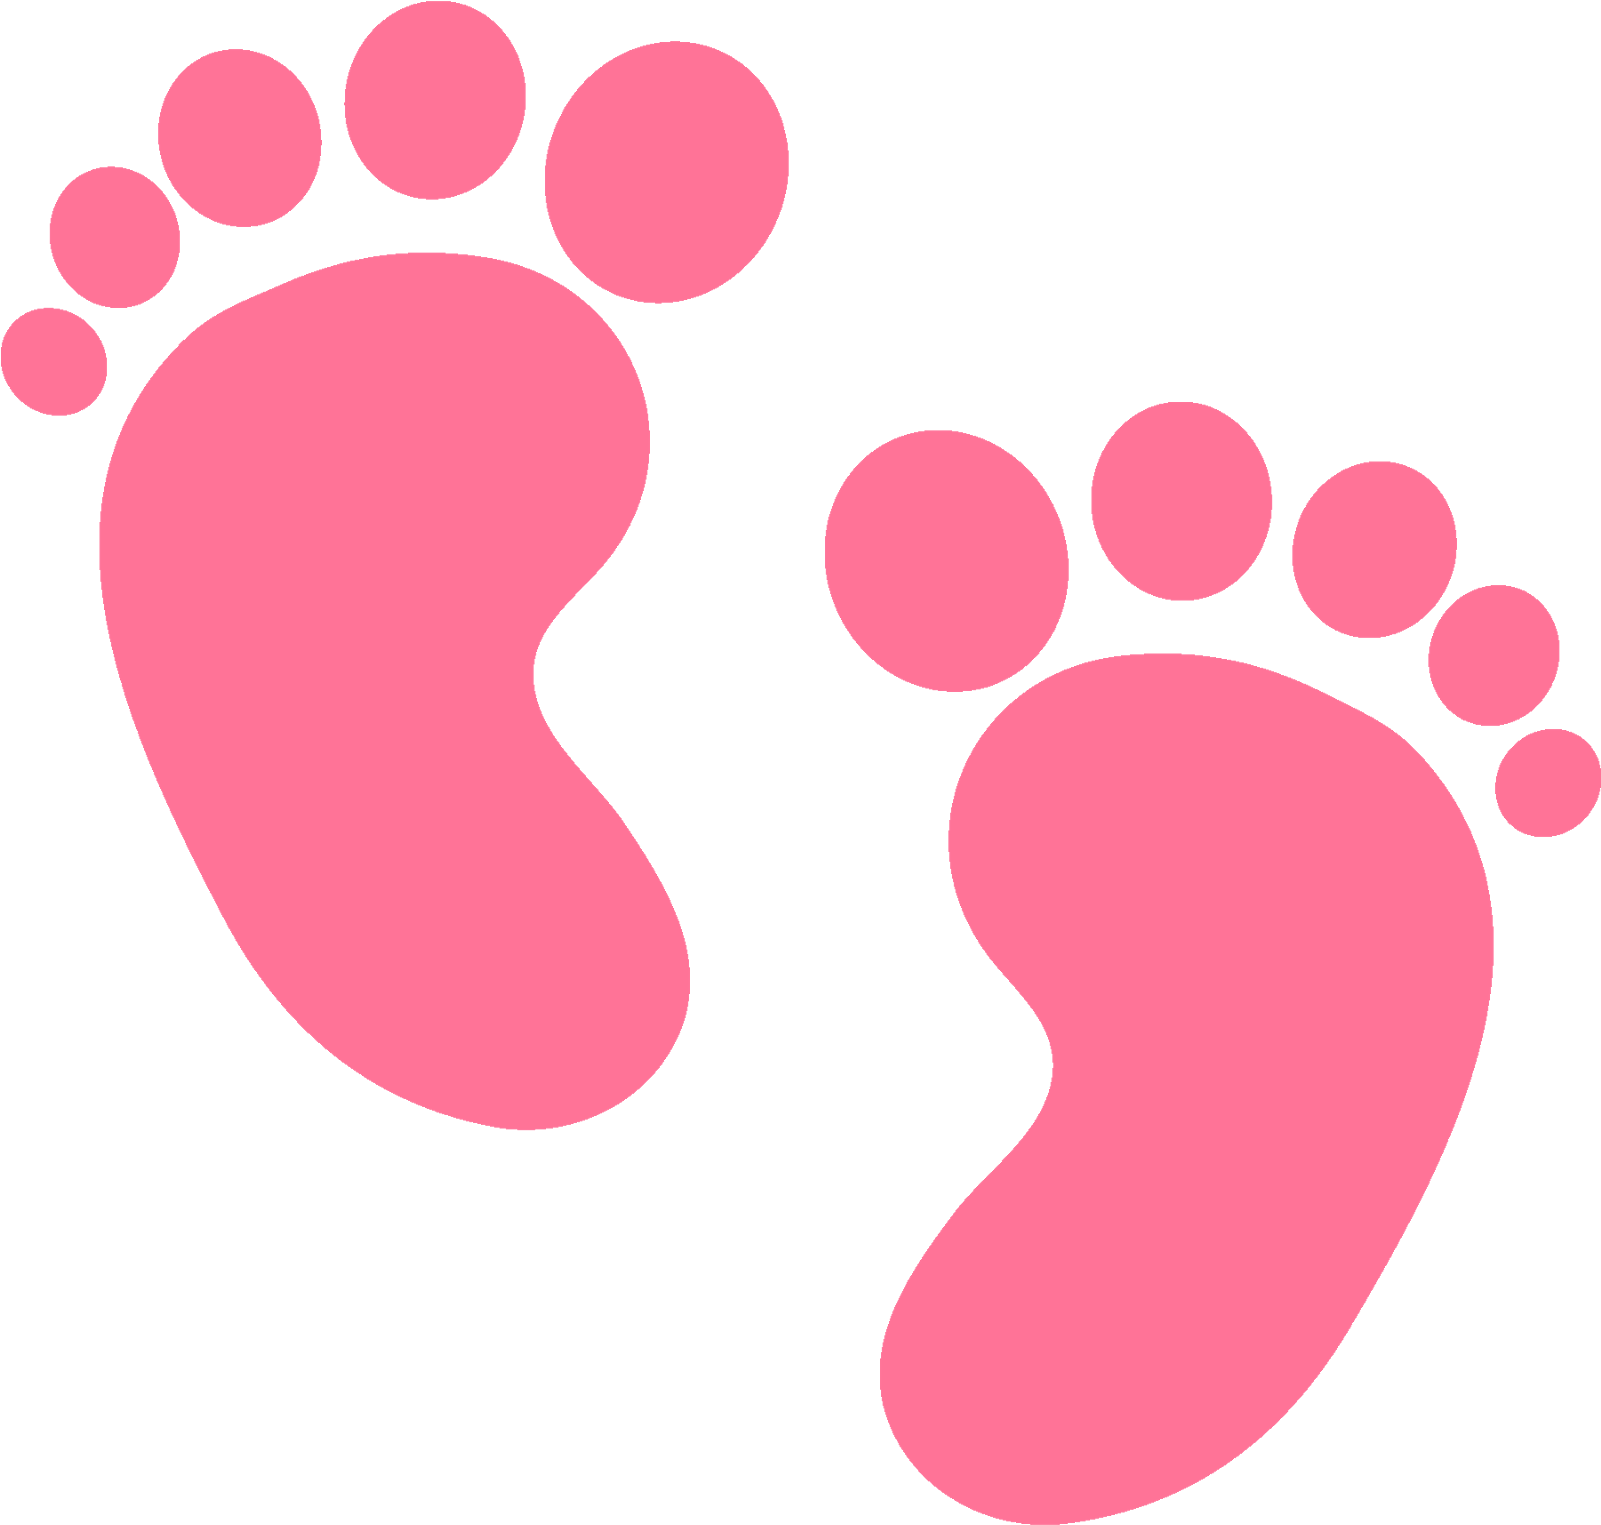 9 - 00 - 9 - 15 - Our District Requires 30 Minutes - Baby Feet Icon Pink (1600x1600)